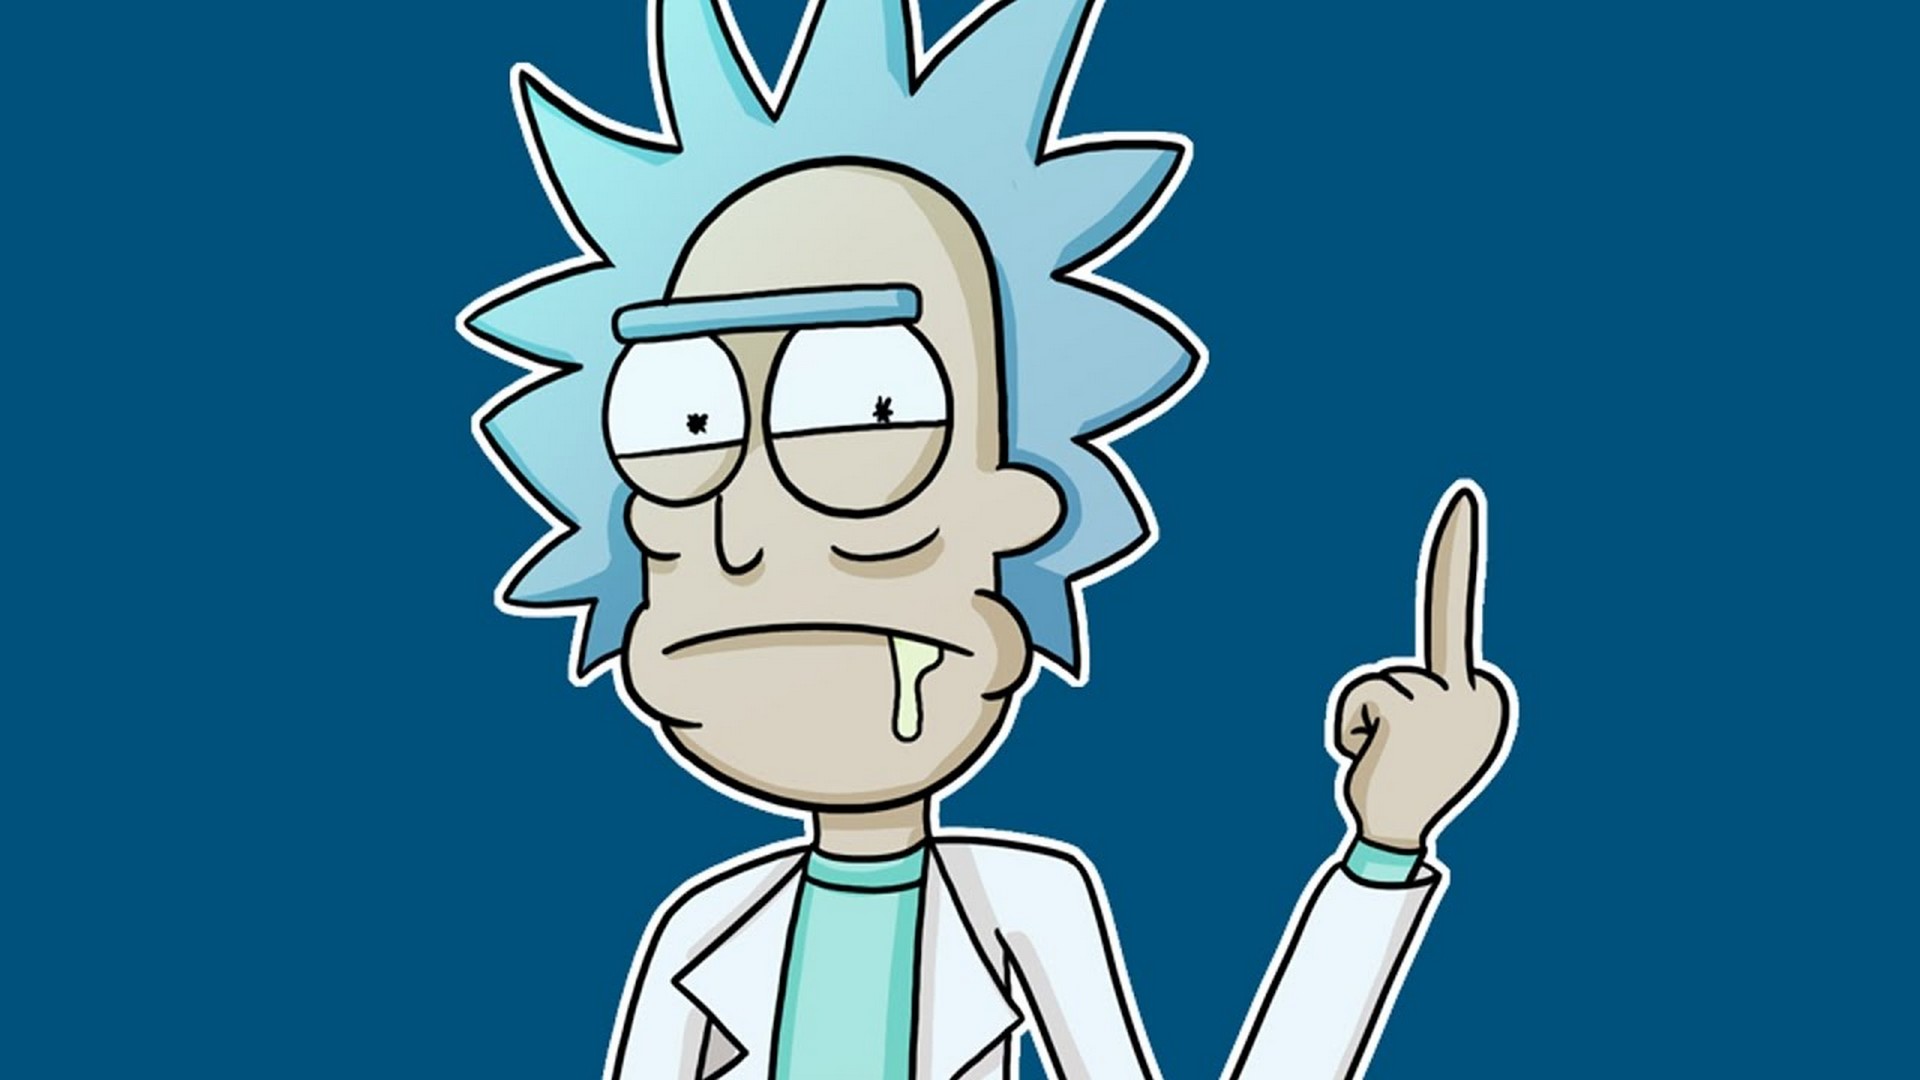 Wallpaper Rick and Morty Rick Desktop with image resolution 1920x1080 pixel. You can use this wallpaper as background for your desktop Computer Screensavers, Android or iPhone smartphones